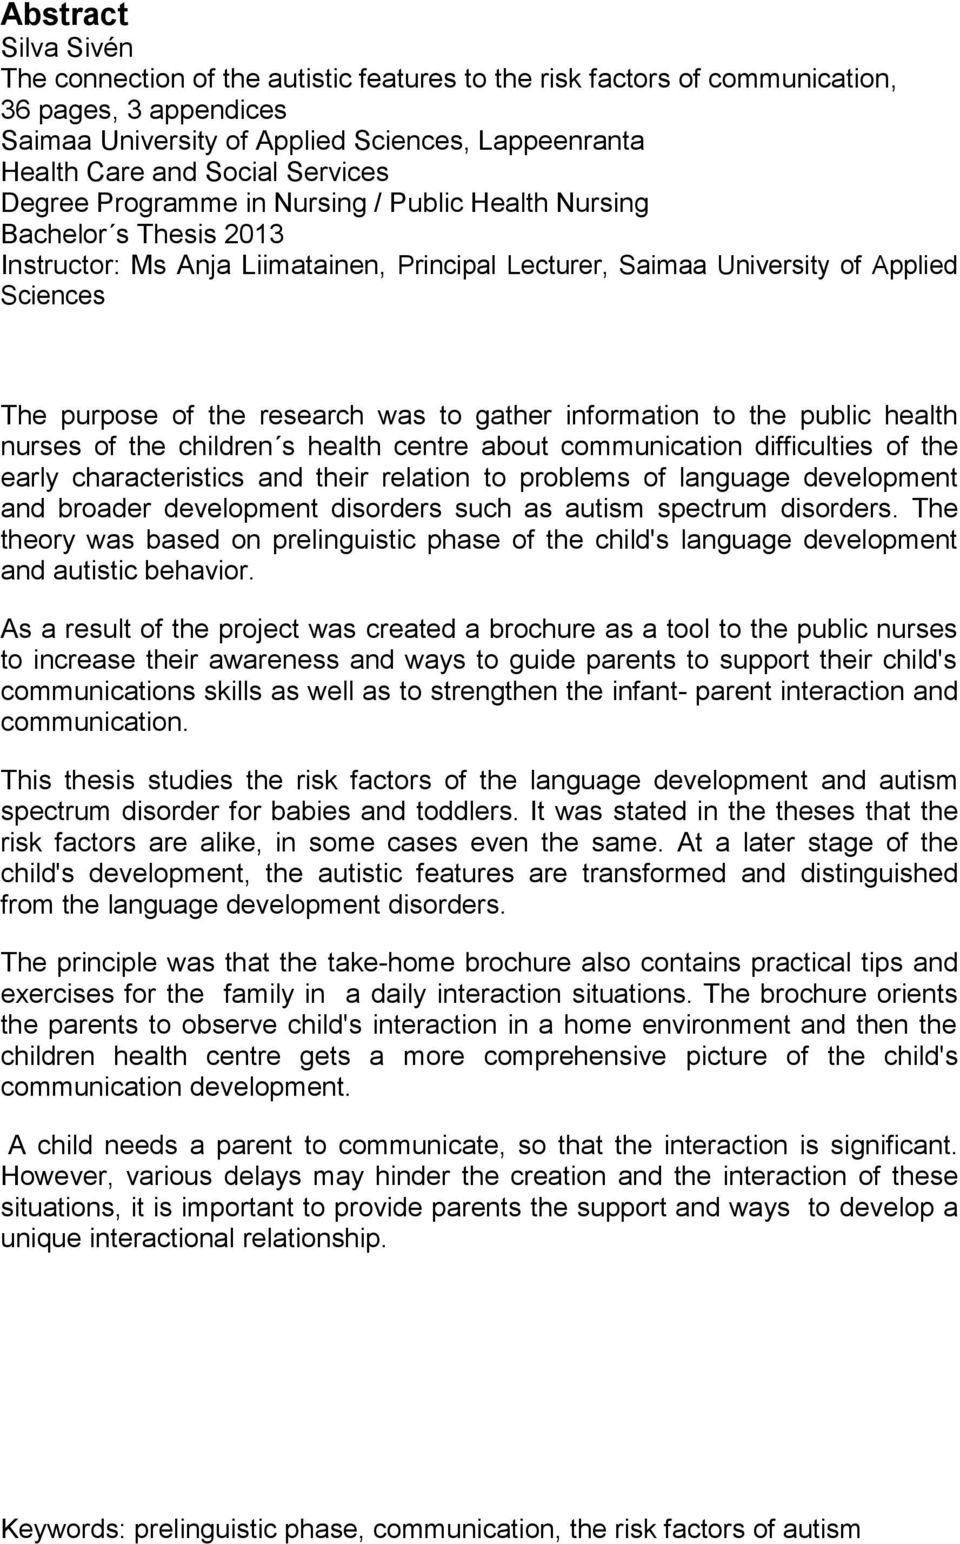 research was to gather information to the public health nurses of the children s health centre about communication difficulties of the early characteristics and their relation to problems of language